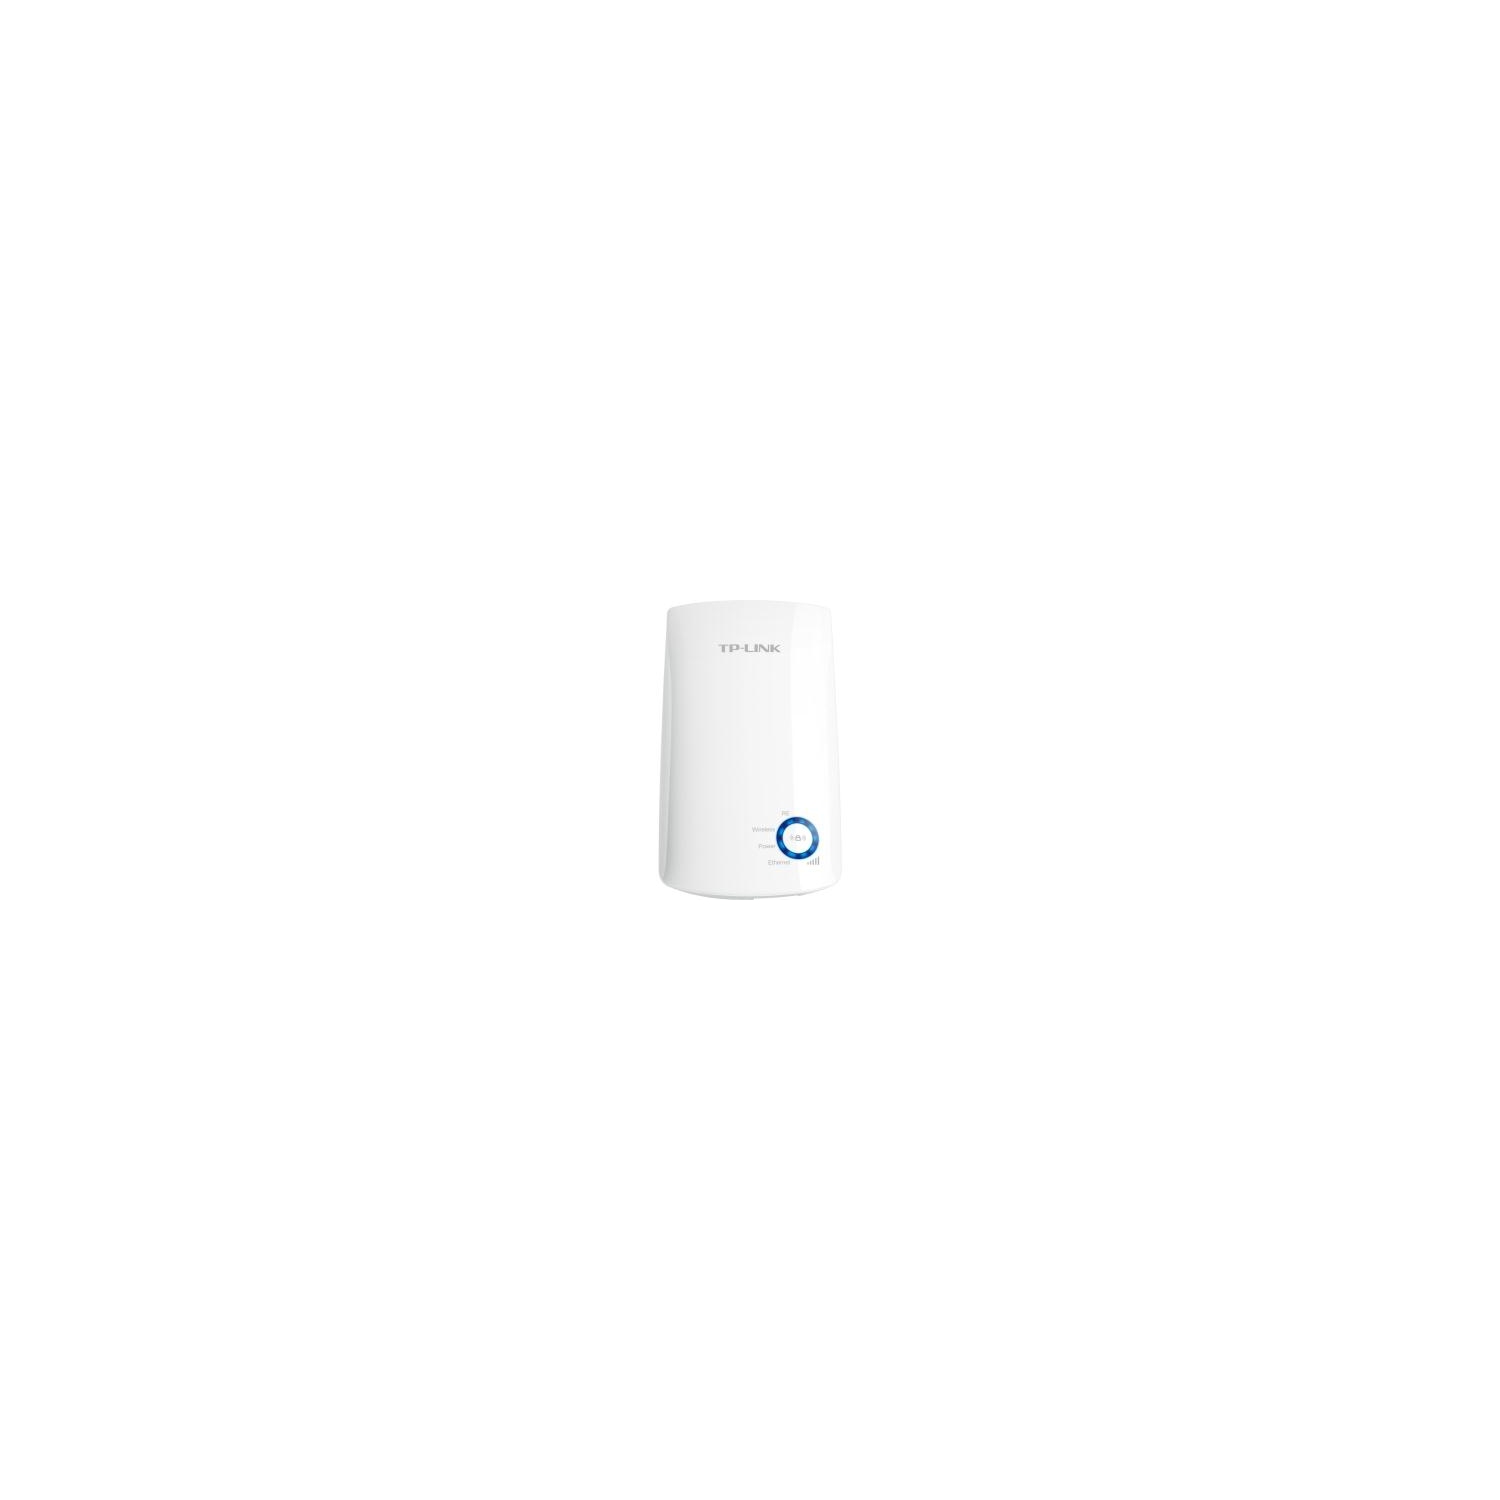 TP-LINK TL-WA850RE 300Mbps Universal Wi-Fi Range Extender, Repeater, Wall Plug design, One-button Setup, Smart Signal